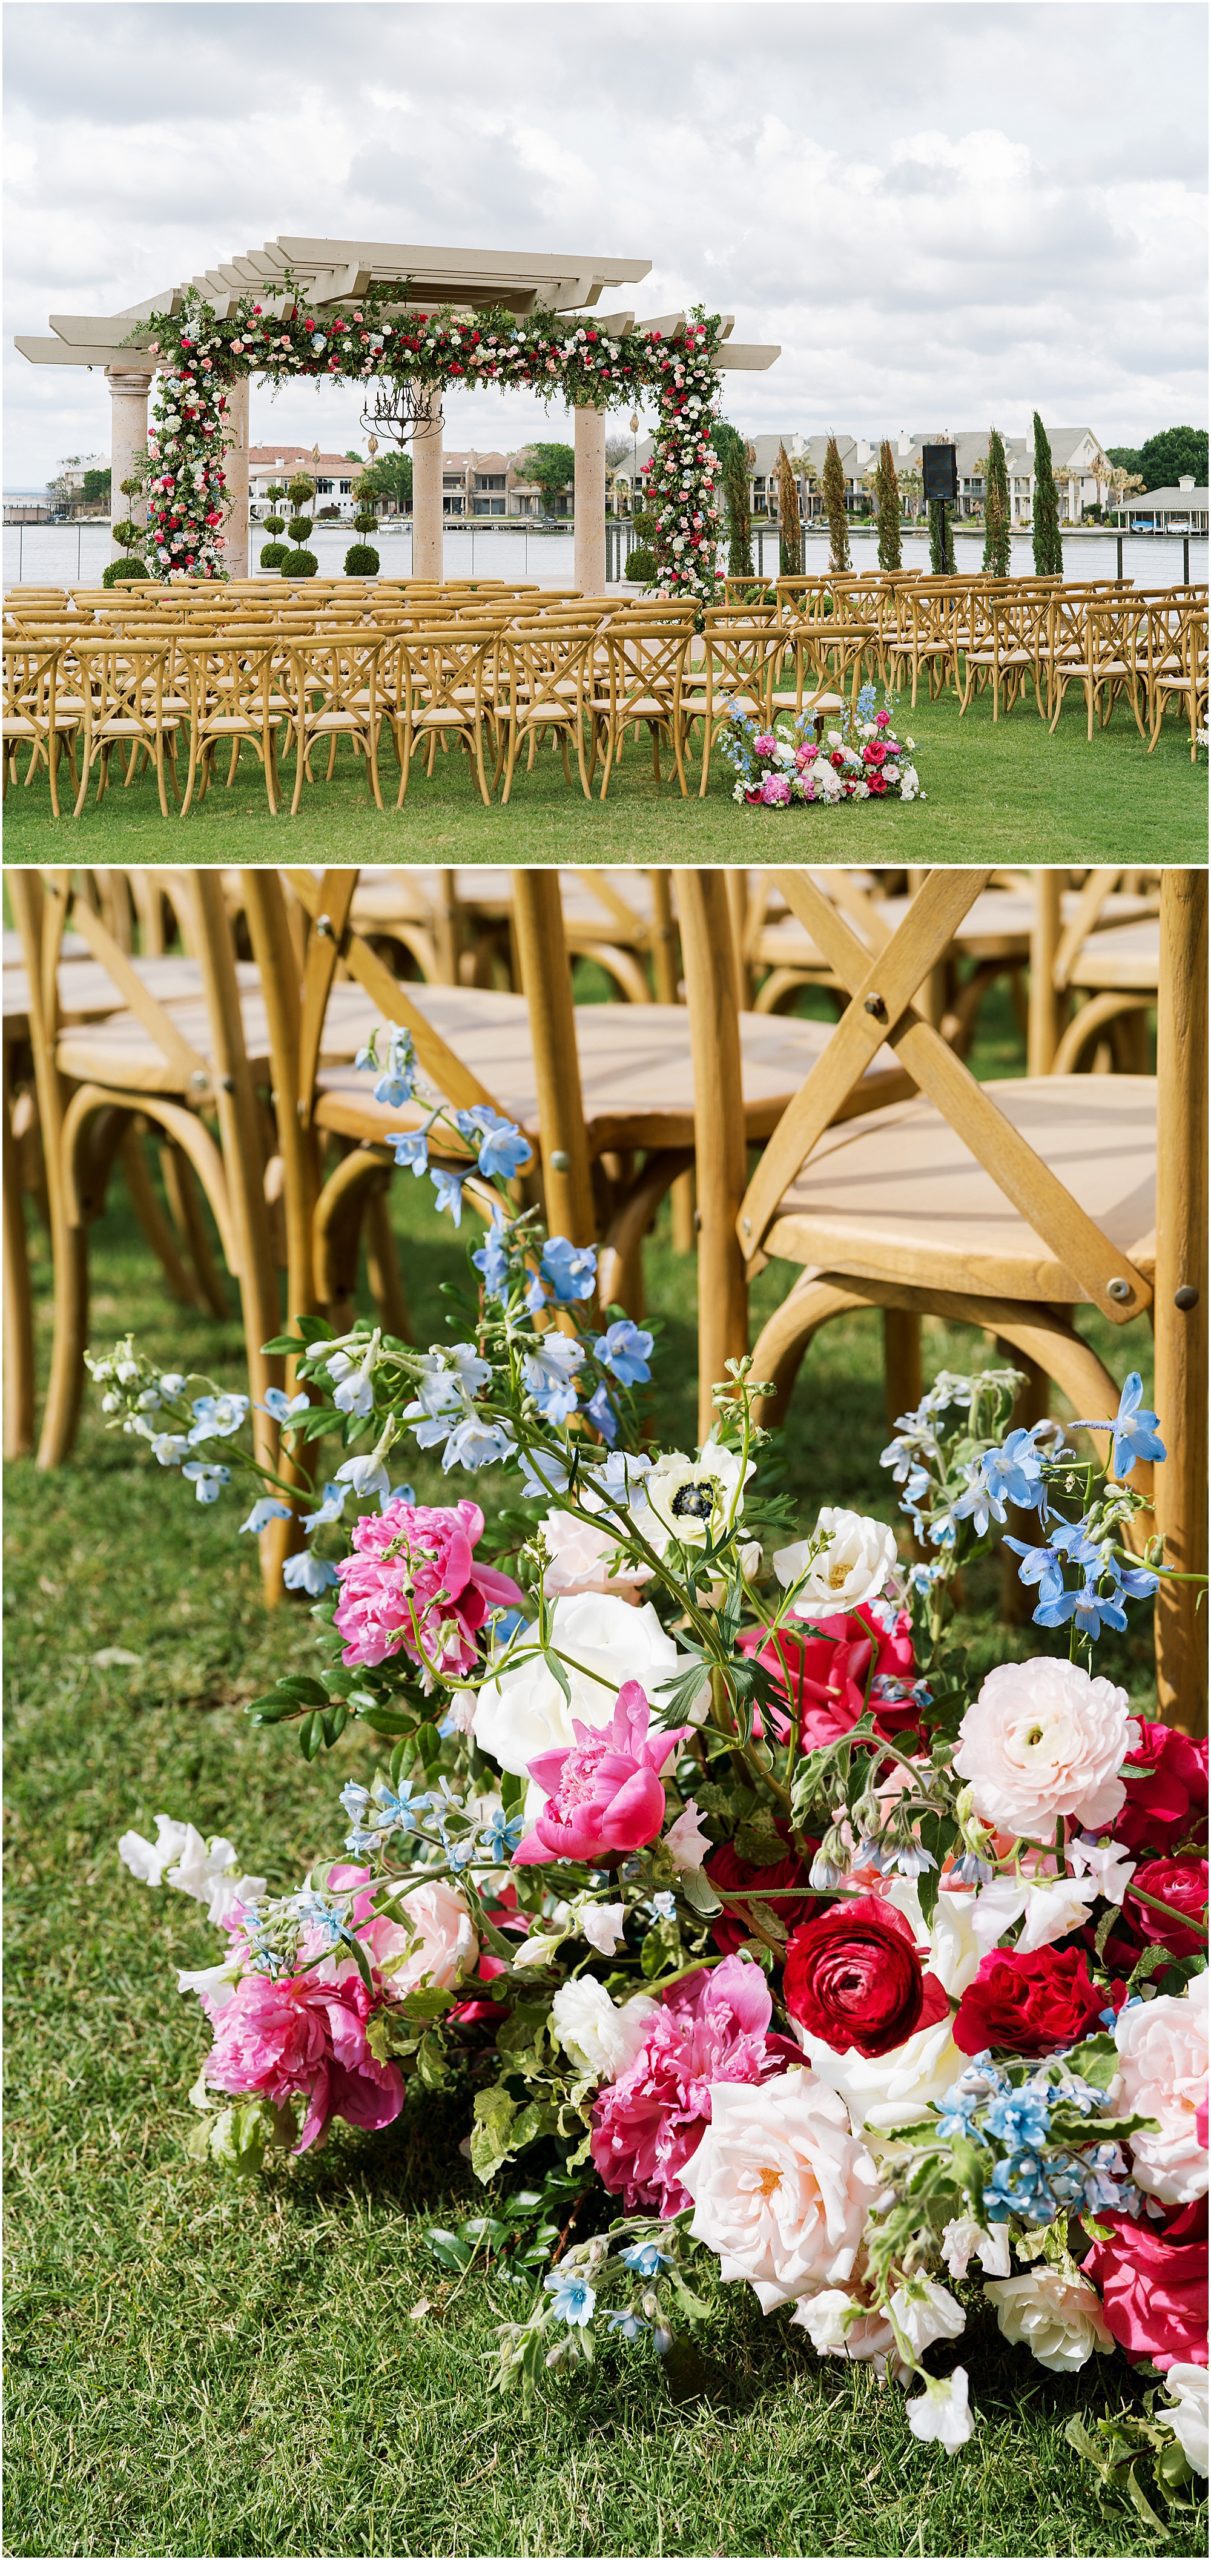 Stems of ATX floral designers scattered colorful florals all around the ceremony site overlooking the lake.